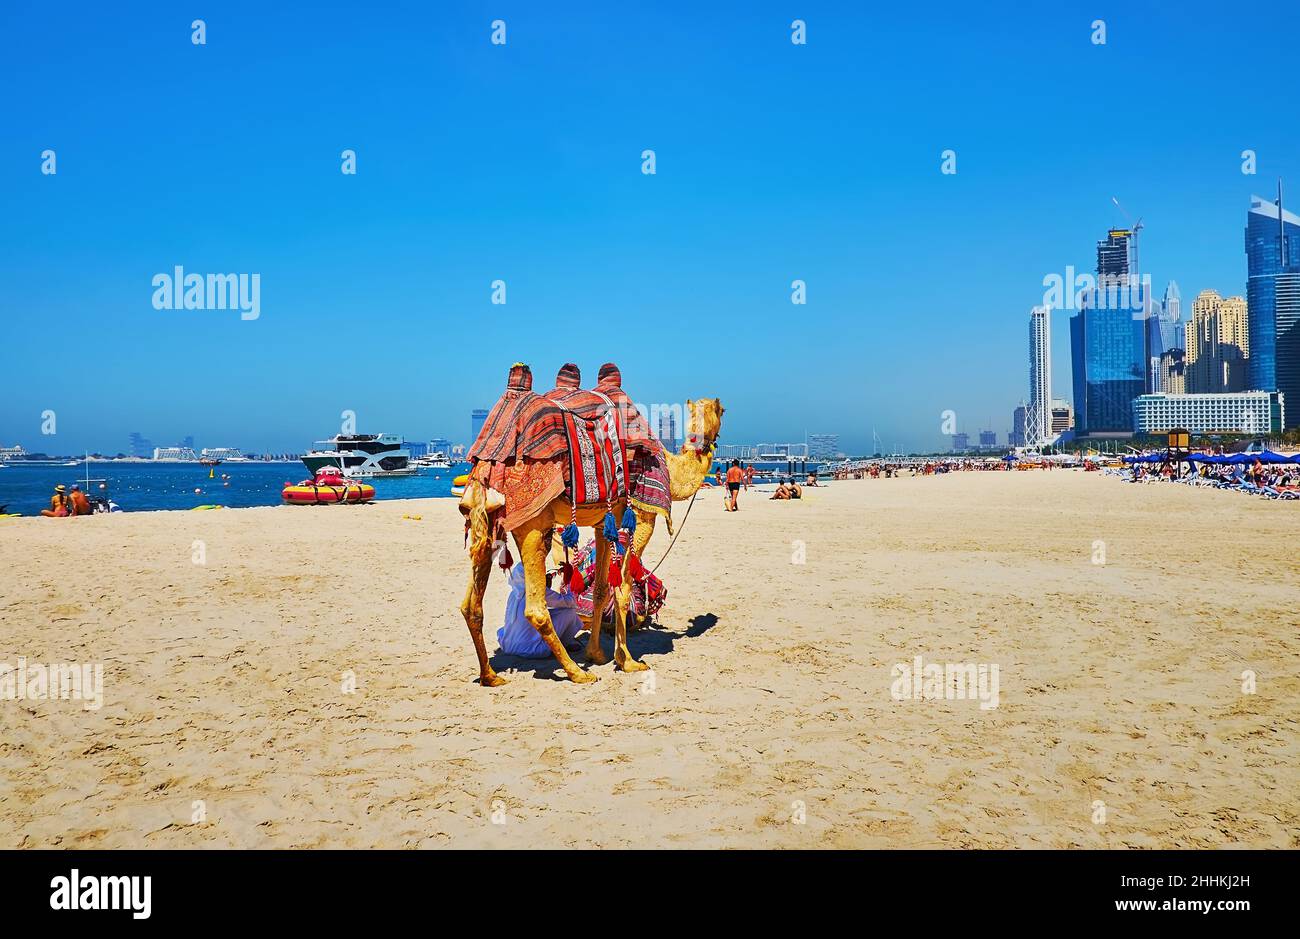 The camel attracts the tourists to make a selfie on JBR Marina beach with sandy coast and skyscrapers of Dubai Marina in background, UAE Stock Photo